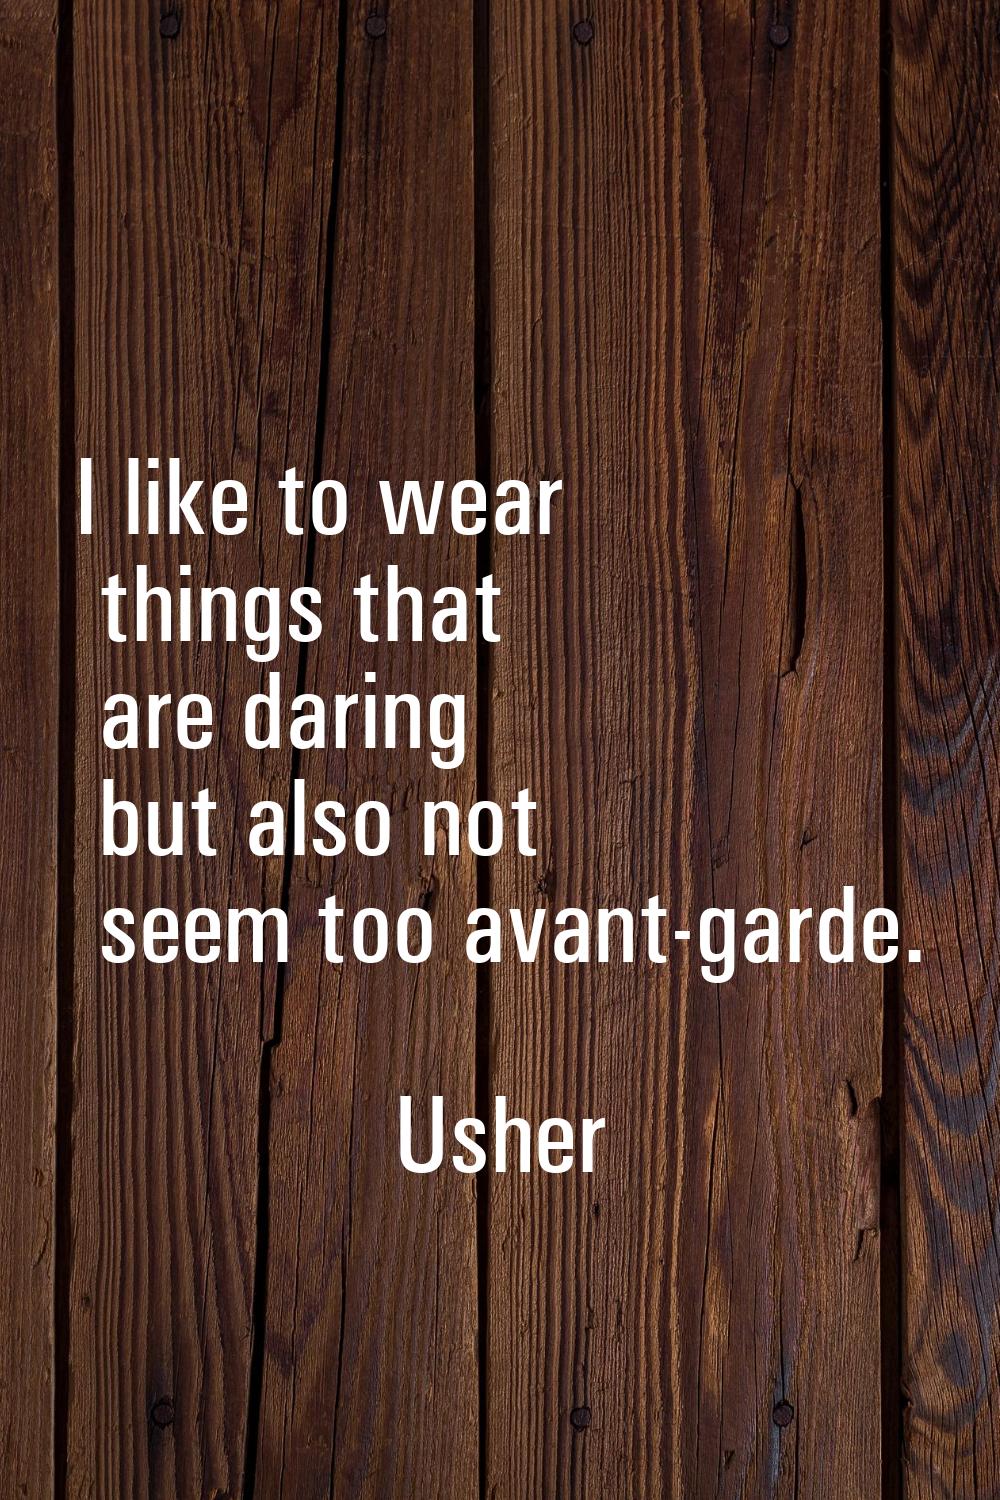 I like to wear things that are daring but also not seem too avant-garde.